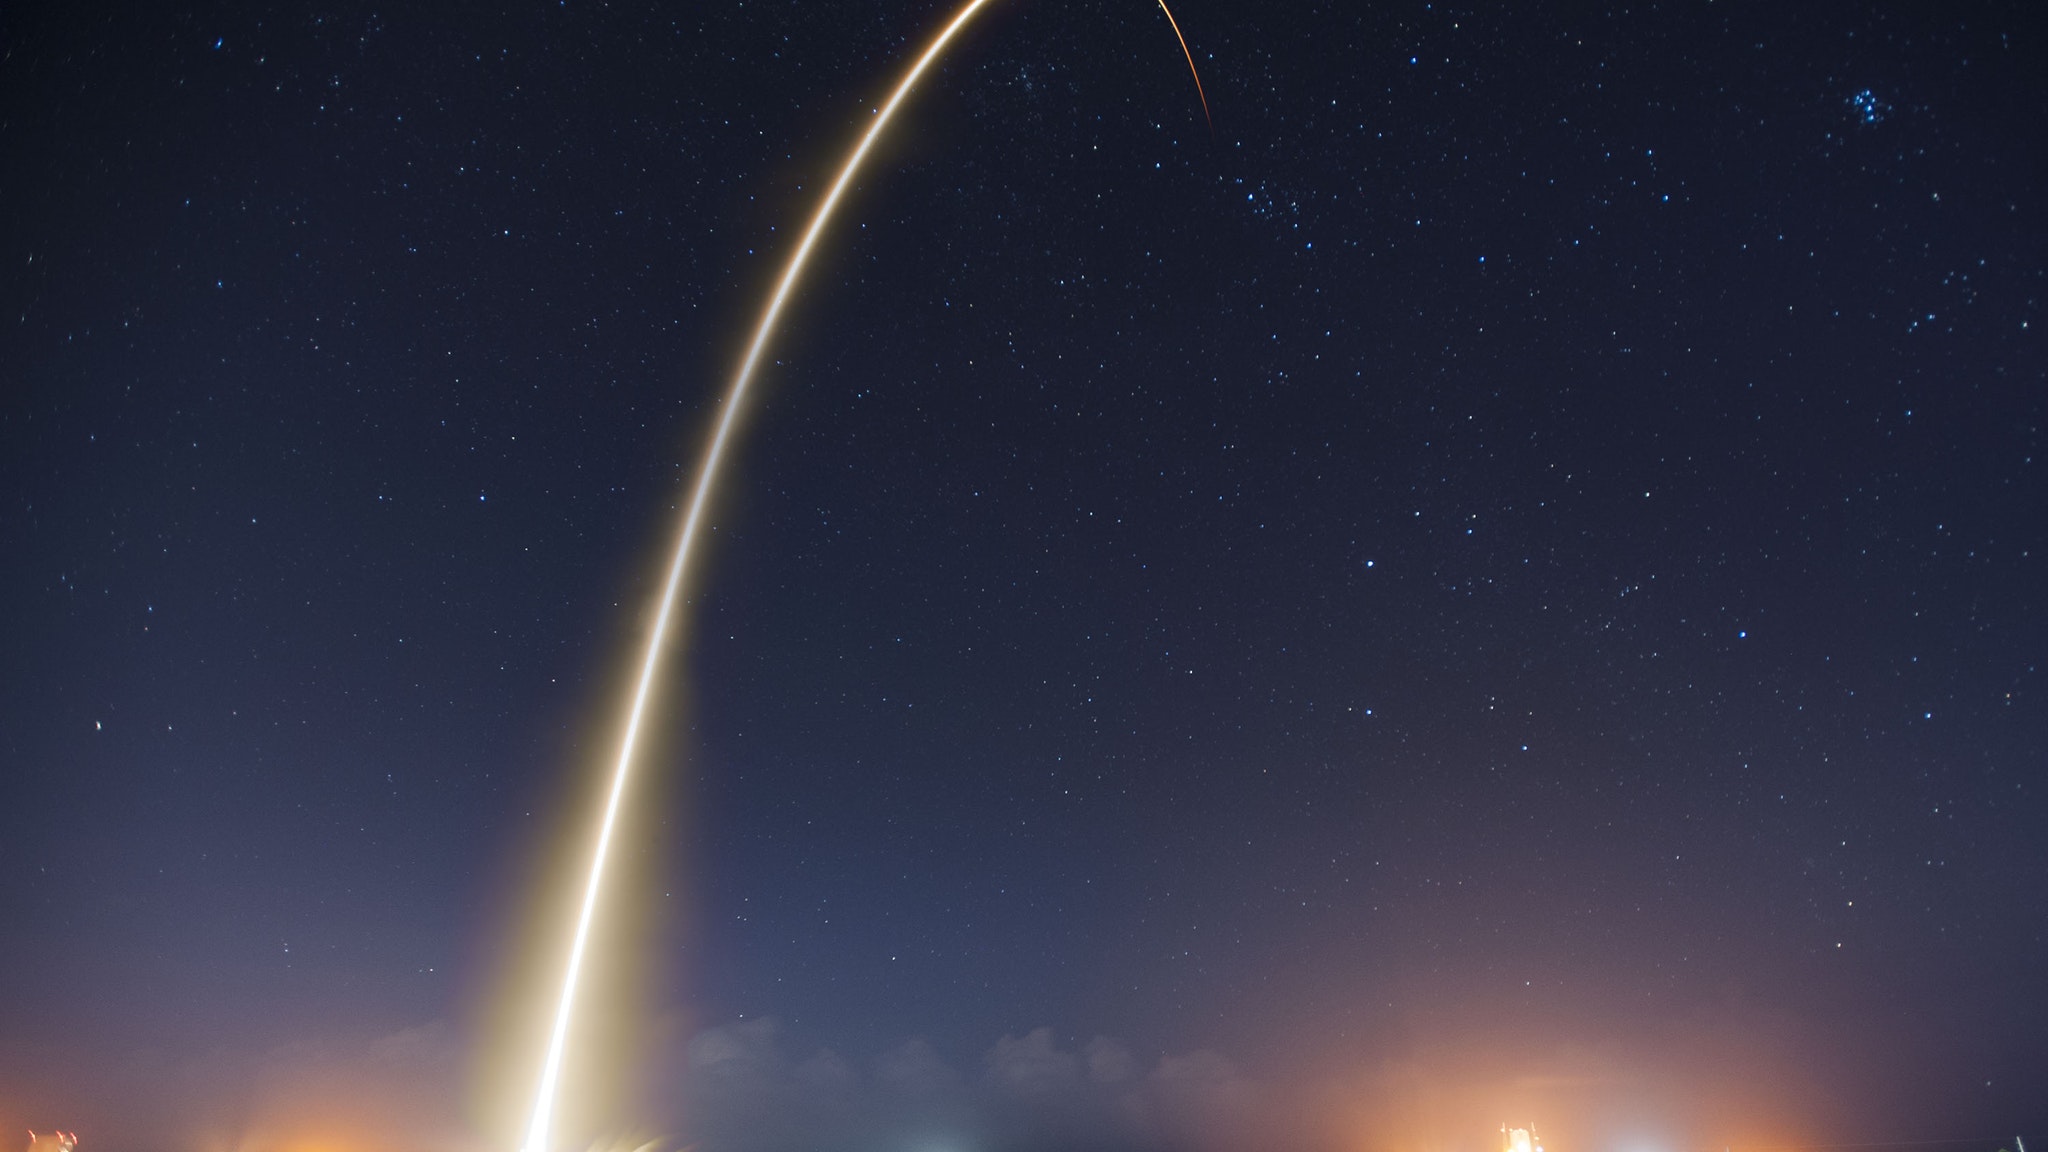 Discovery, Launching, Rocket, Lift off, Sky, Space, Stars Wallpaper